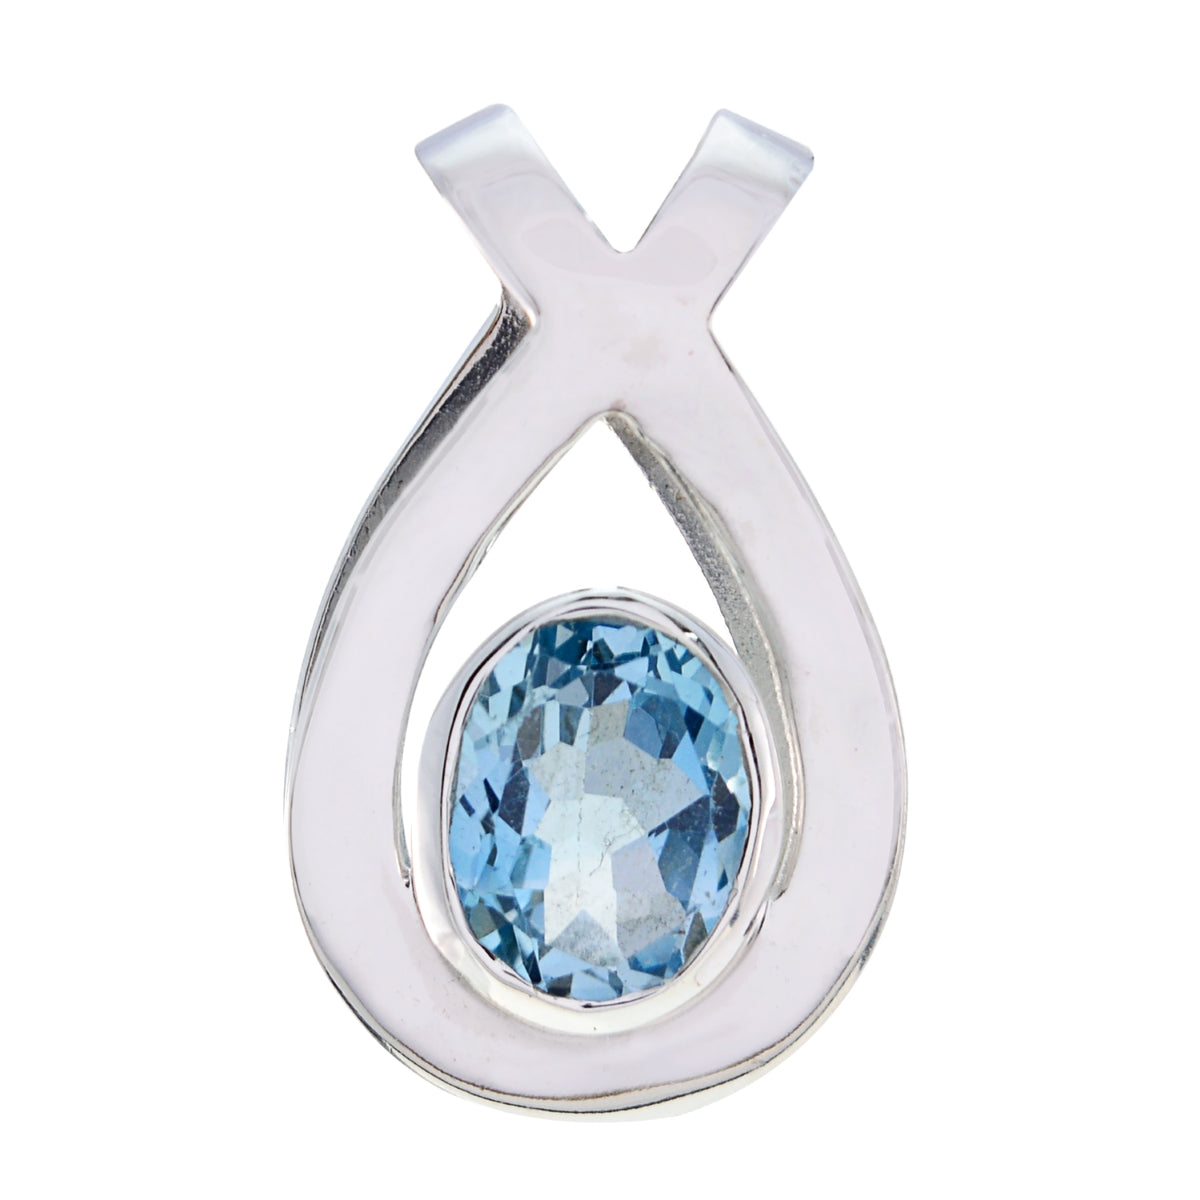 Riyo Nice Gemstone Oval Faceted Blue Blue Topaz 925 Silver Pendants independence gift